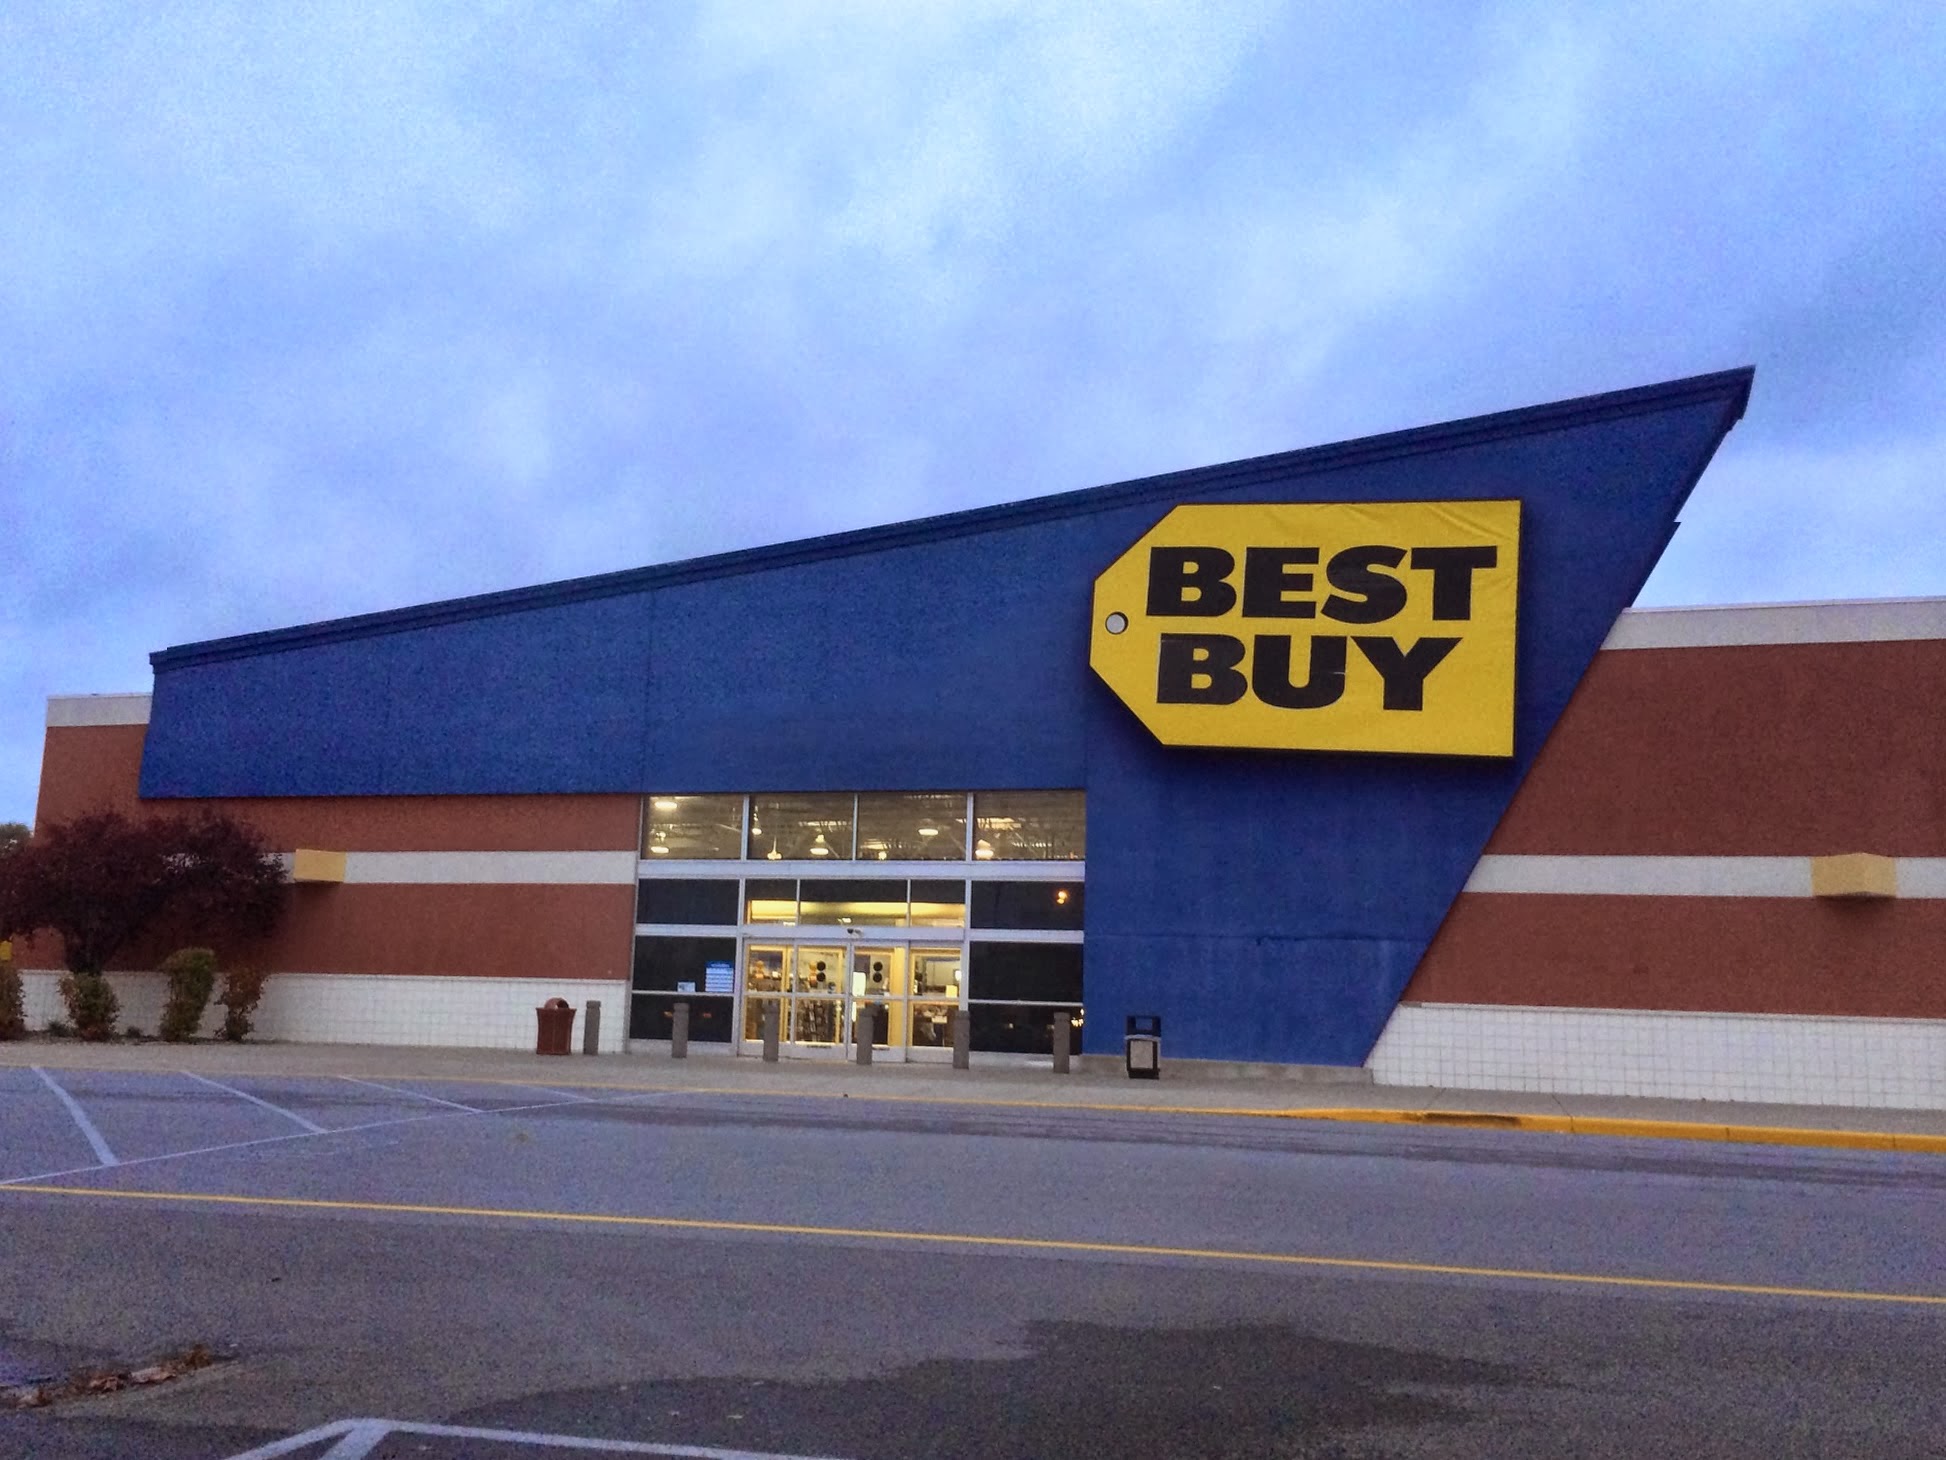 Many Best Buy stores will open at midnight for the PS4 release date, offering some to users who did not pre-order.